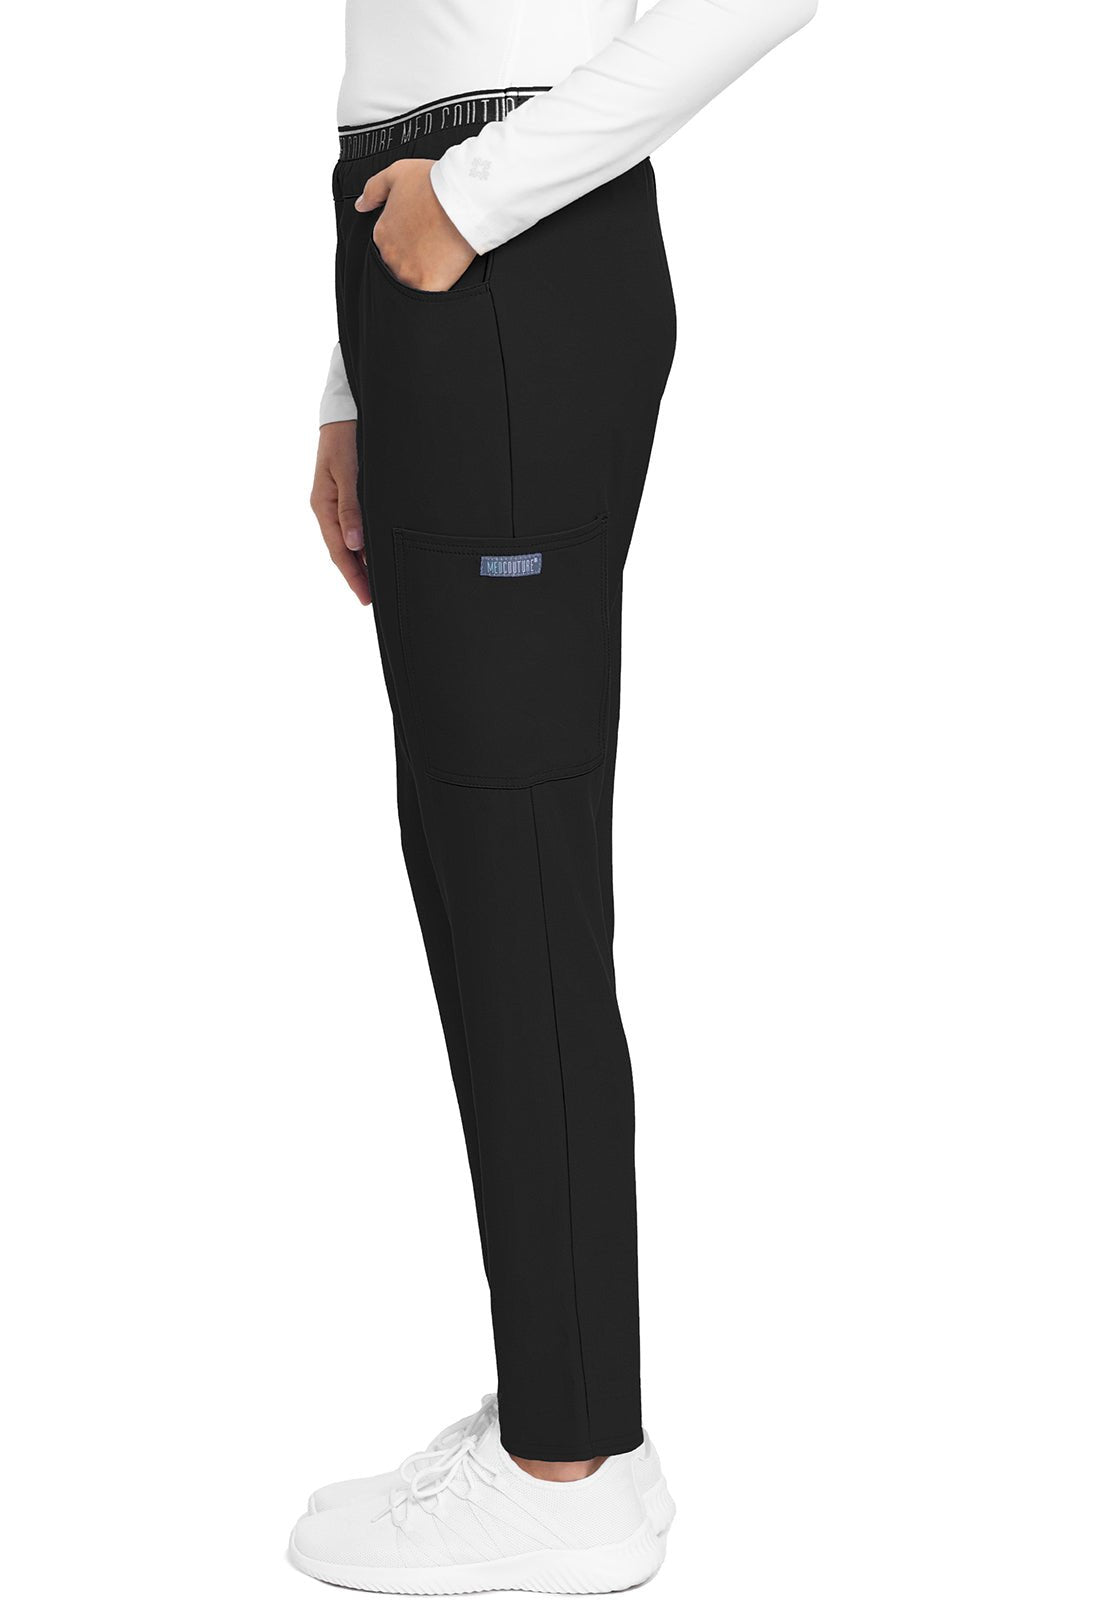 Med Couture Insight Scrub Pull On Pant MC009 in Black, Navy, Pewter, Royal - Scrubs Select